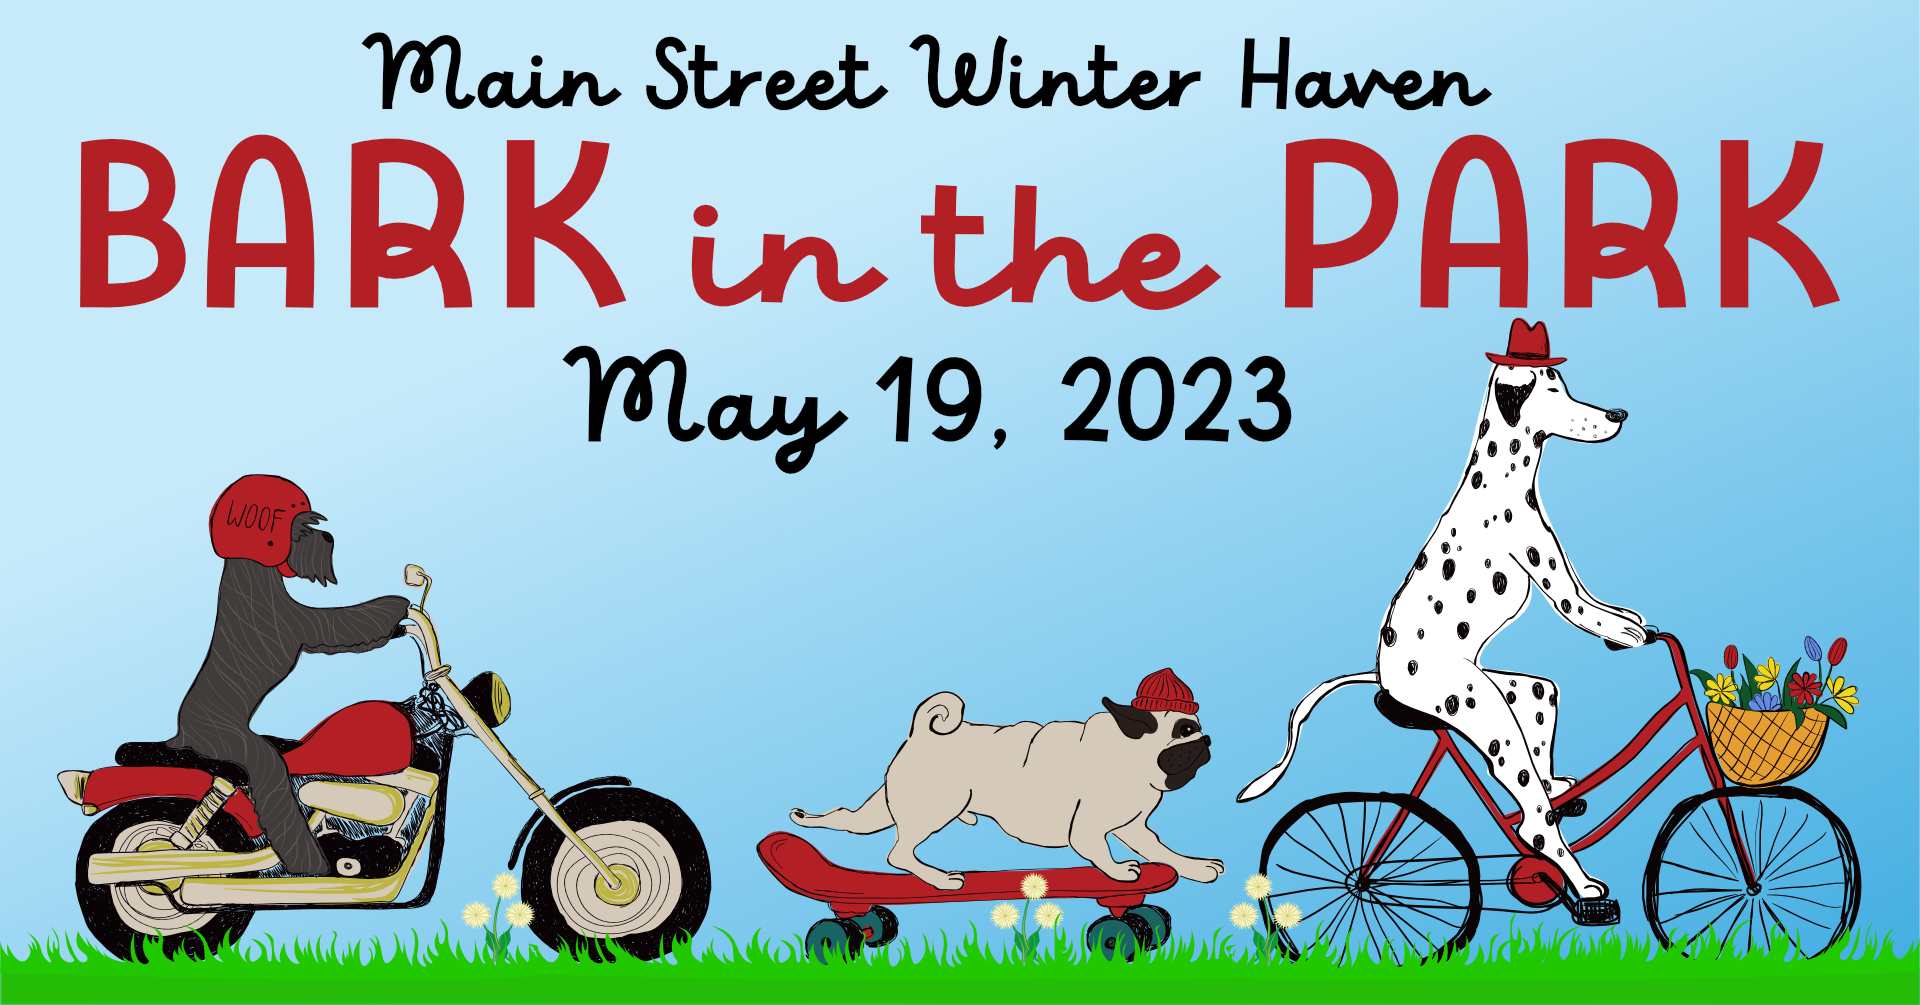 Bark in the Park 2023 event header